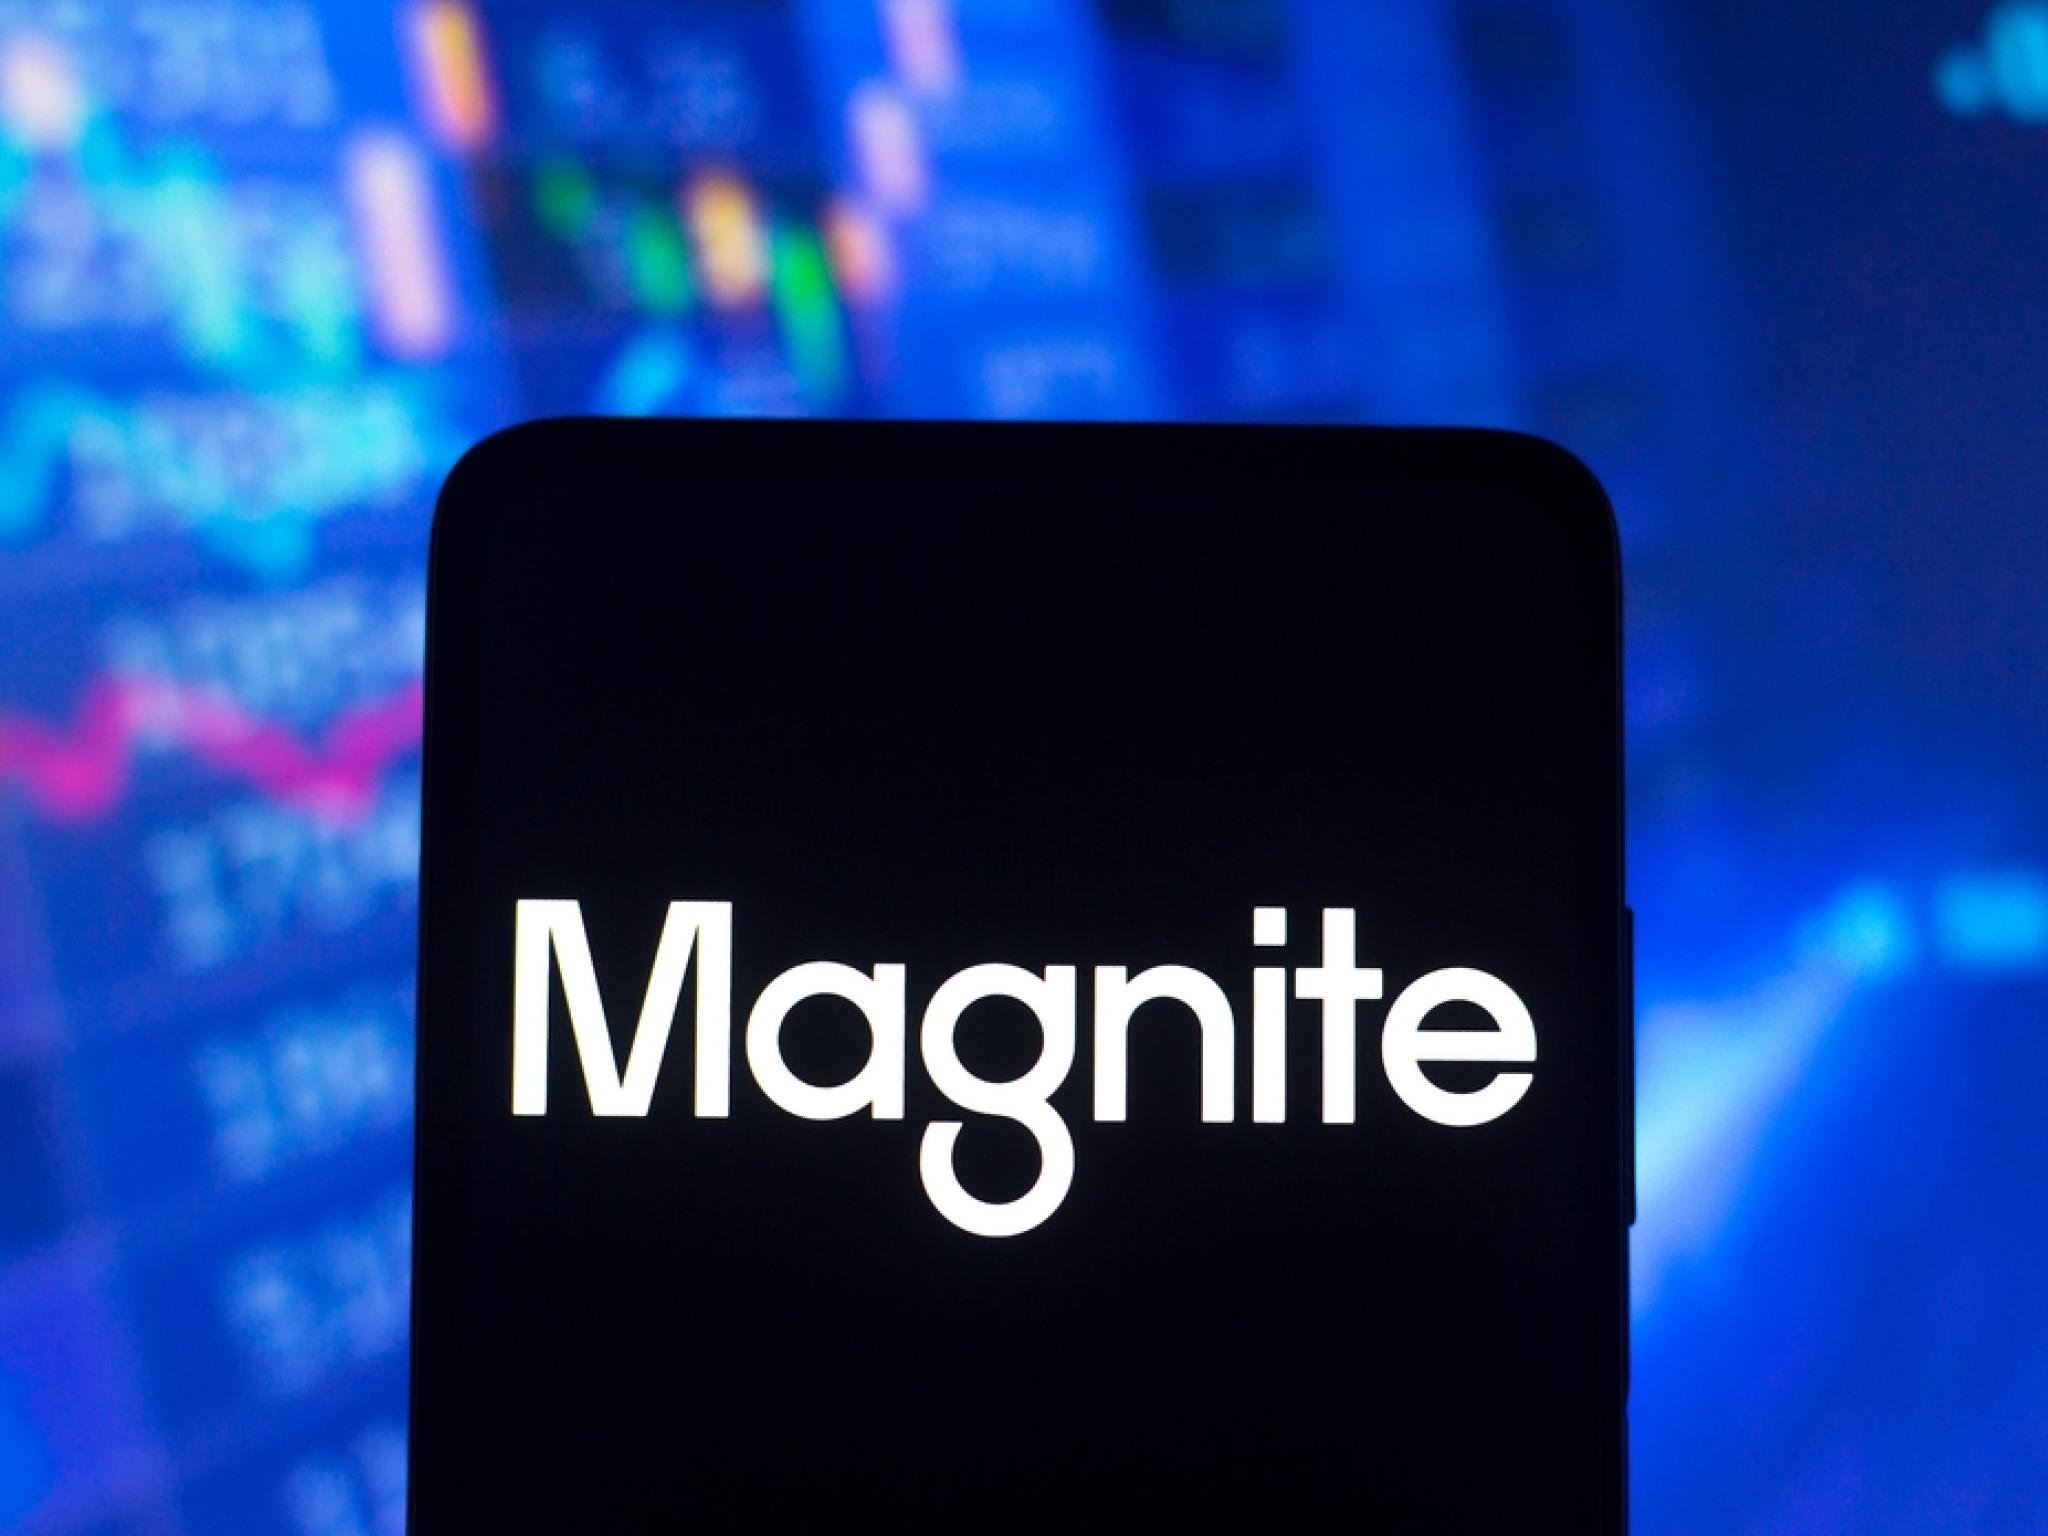  magnite-shows-strength-with-netflix-partnership-analyst-expects-30m-in-revenue-by-2025 